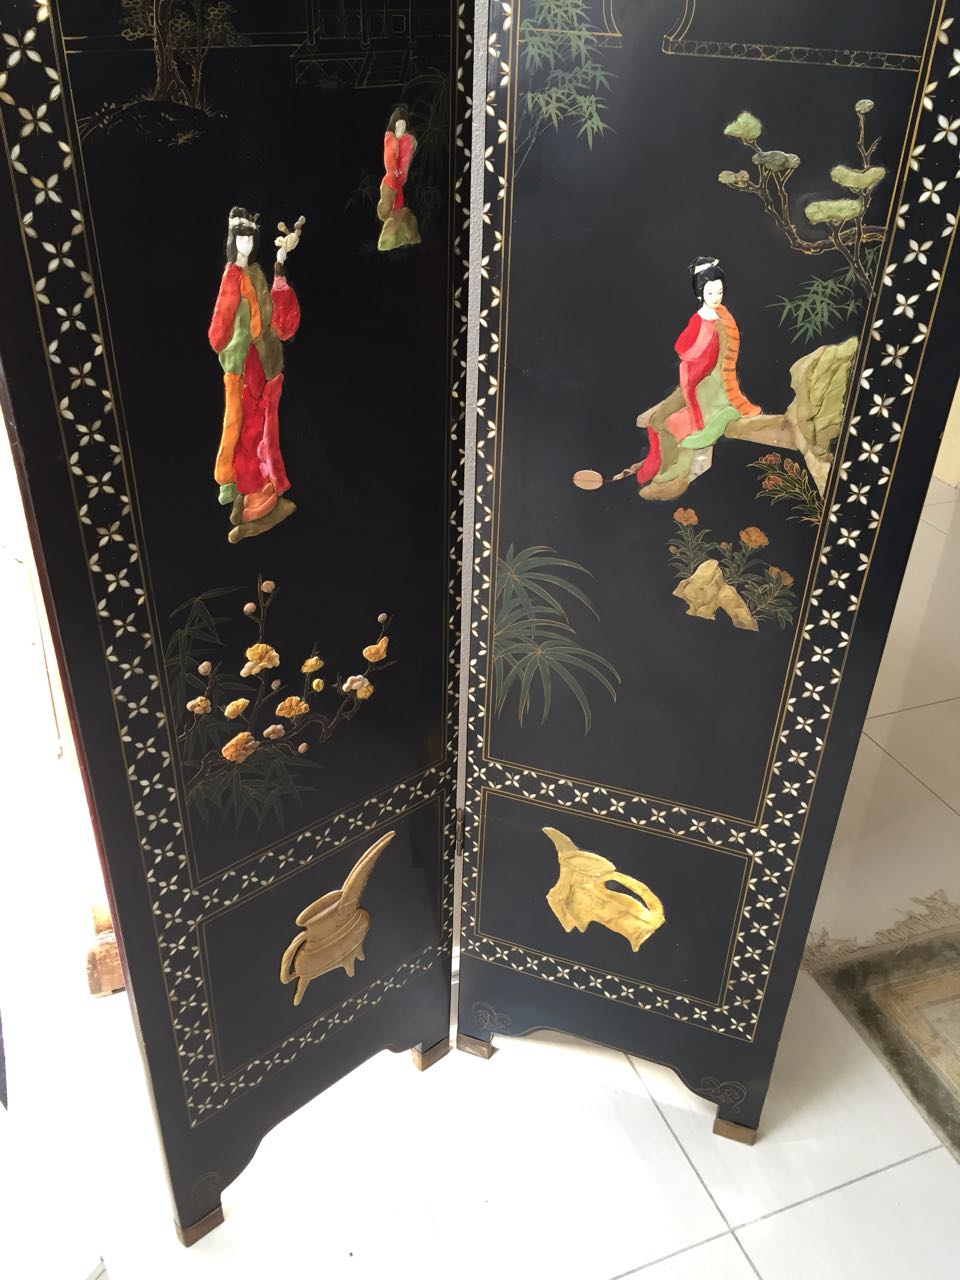 Antique Coromandel Screen/Oriental Dressing Screen/Ebonized Folding Room Divider - price reduced to clear